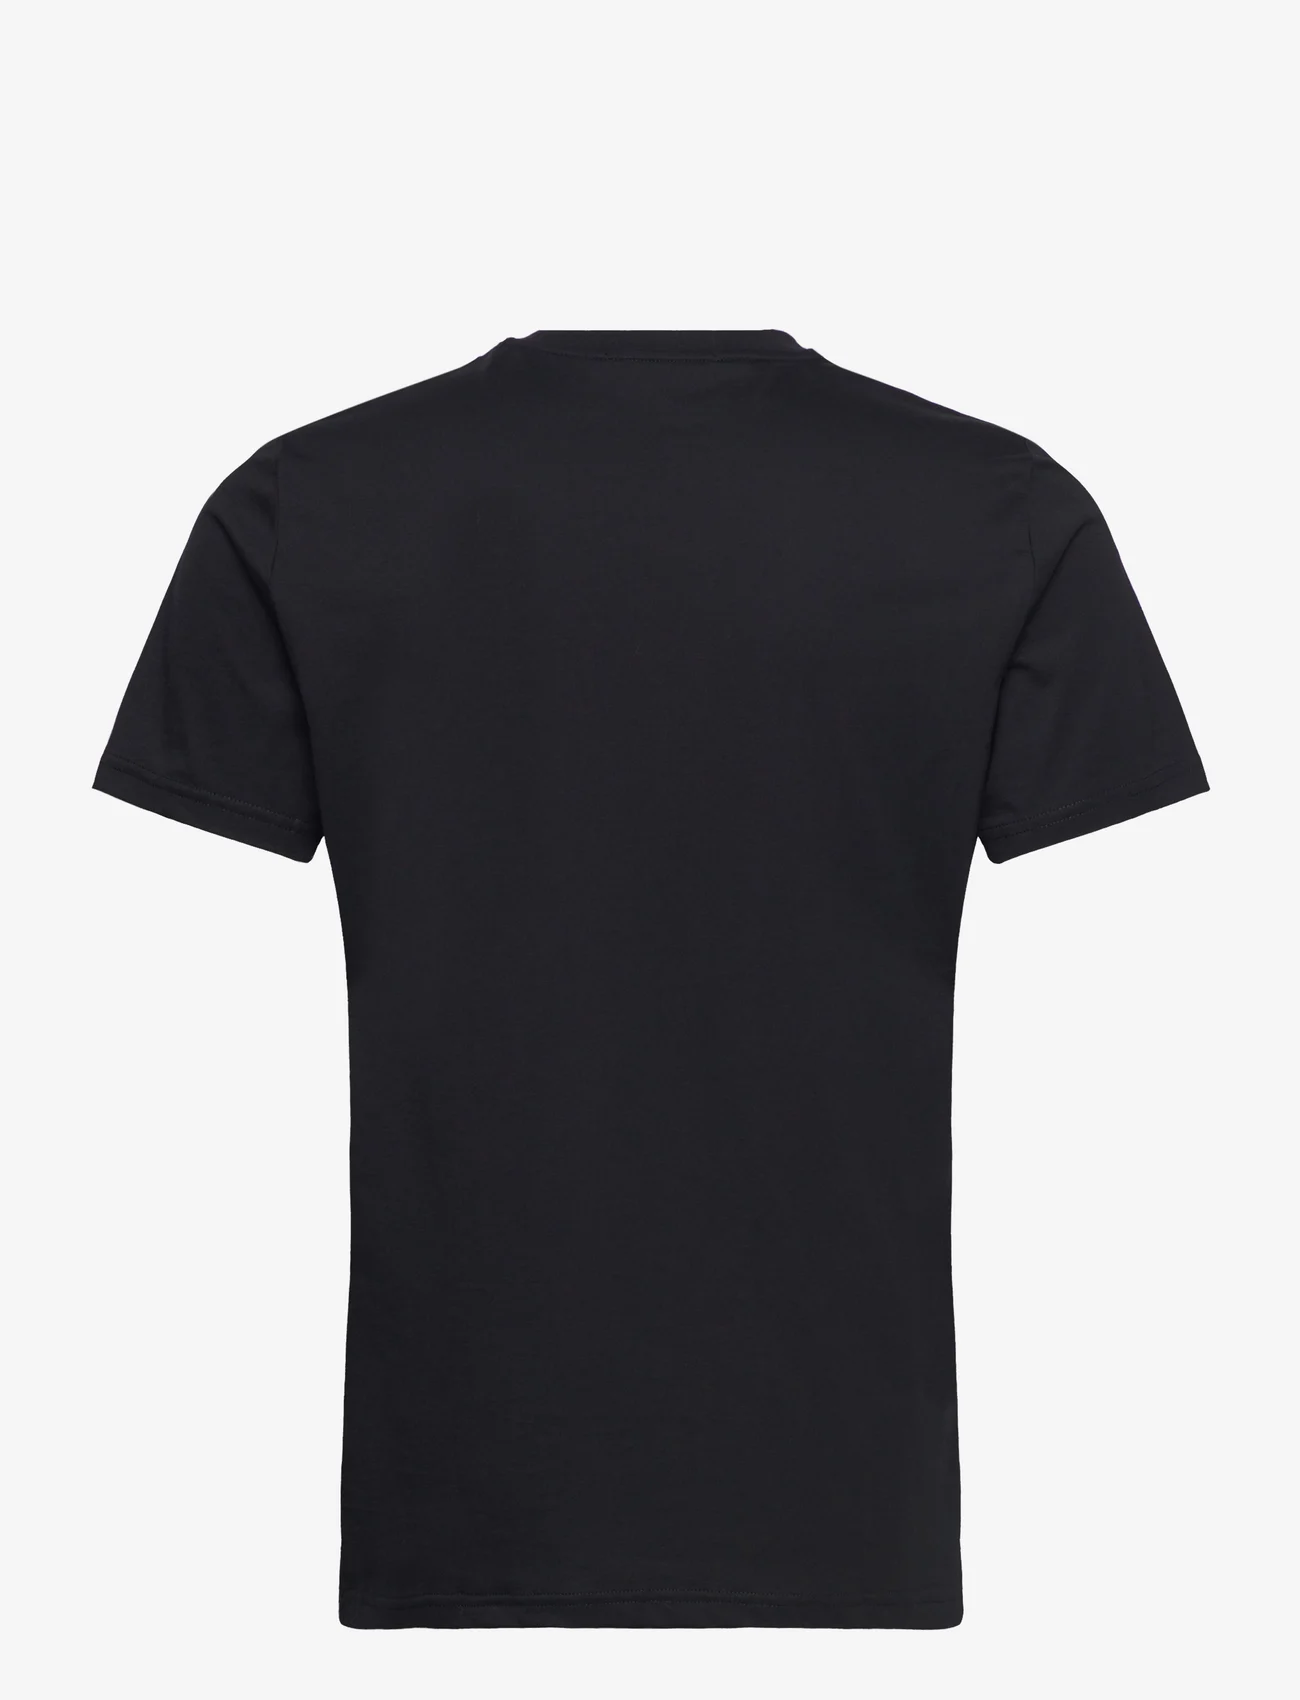 Fred Perry - LAUREL W GRAPHIC TEE - black - 1